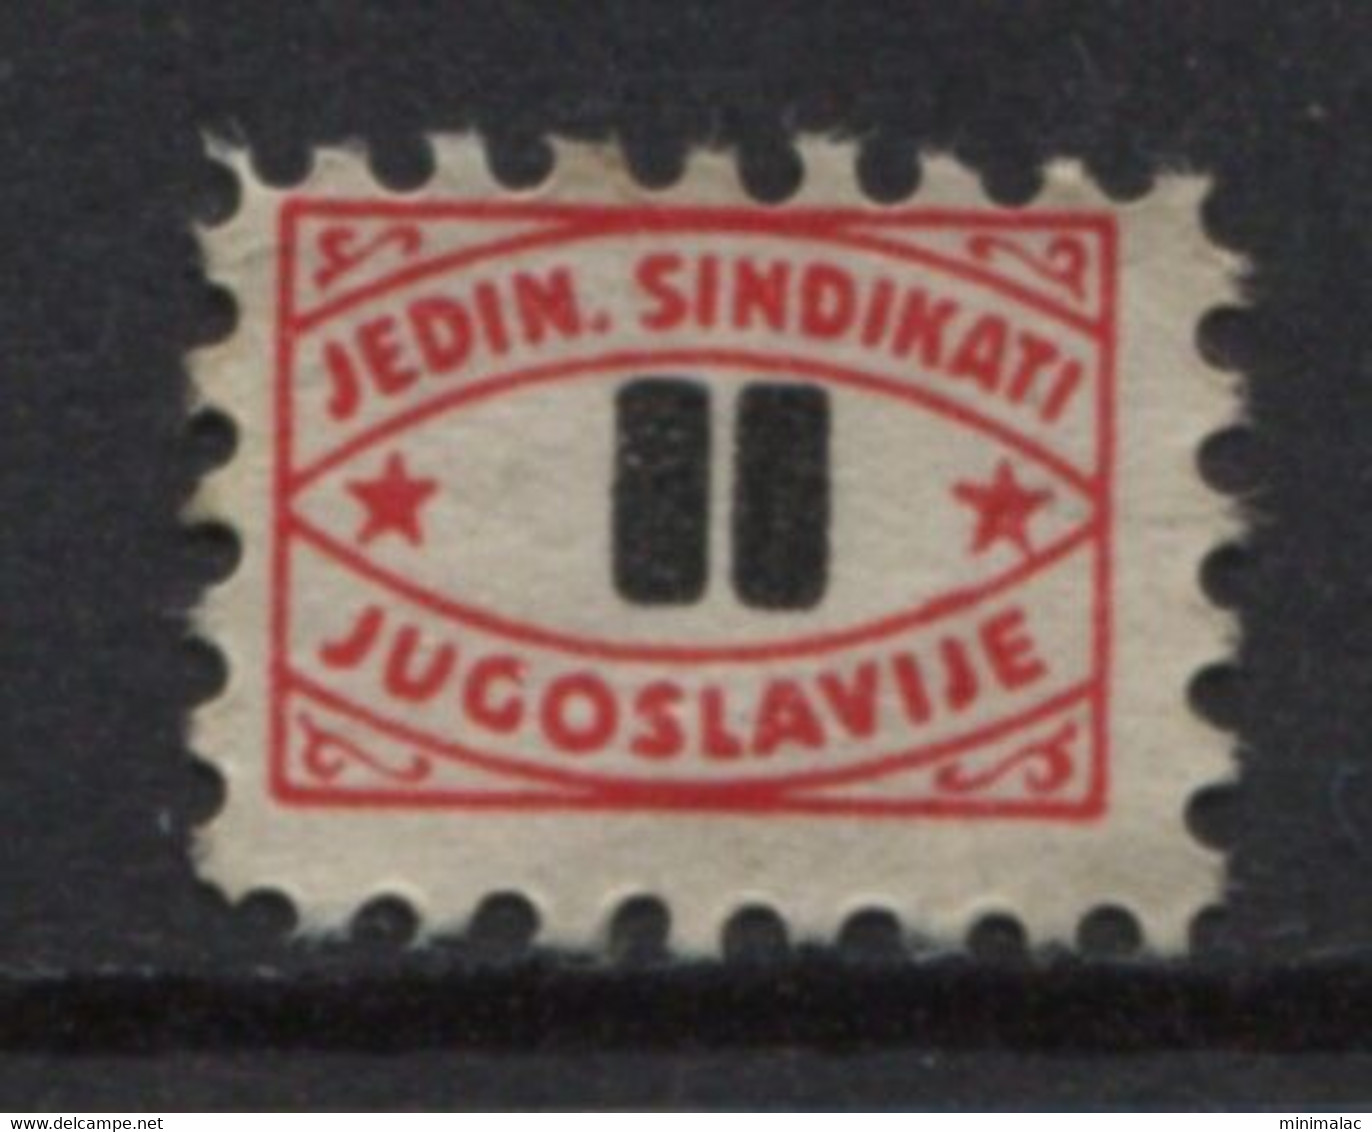 Yugoslavia 1945, Stamp For Membership, Labor Union, Administrative Stamp - Revenue, Tax Stamp, II - Officials